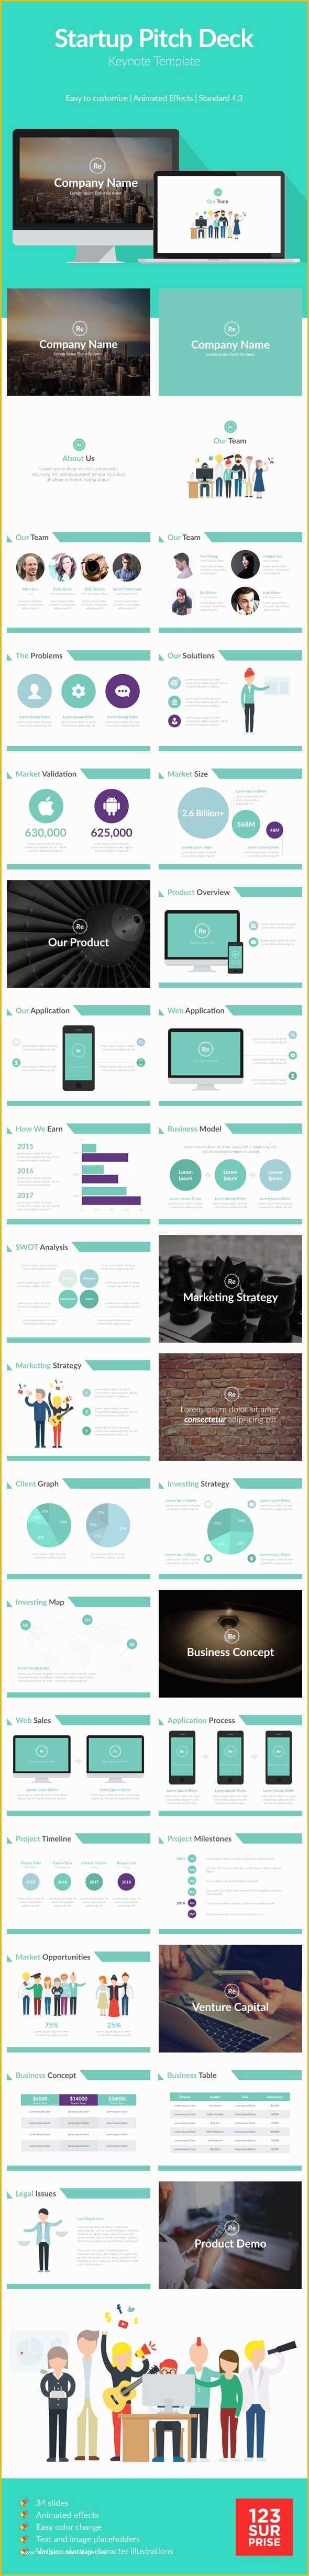 Pitch Deck Template Powerpoint Free Download Of 25 Best Ideas About Pitch On Pinterest